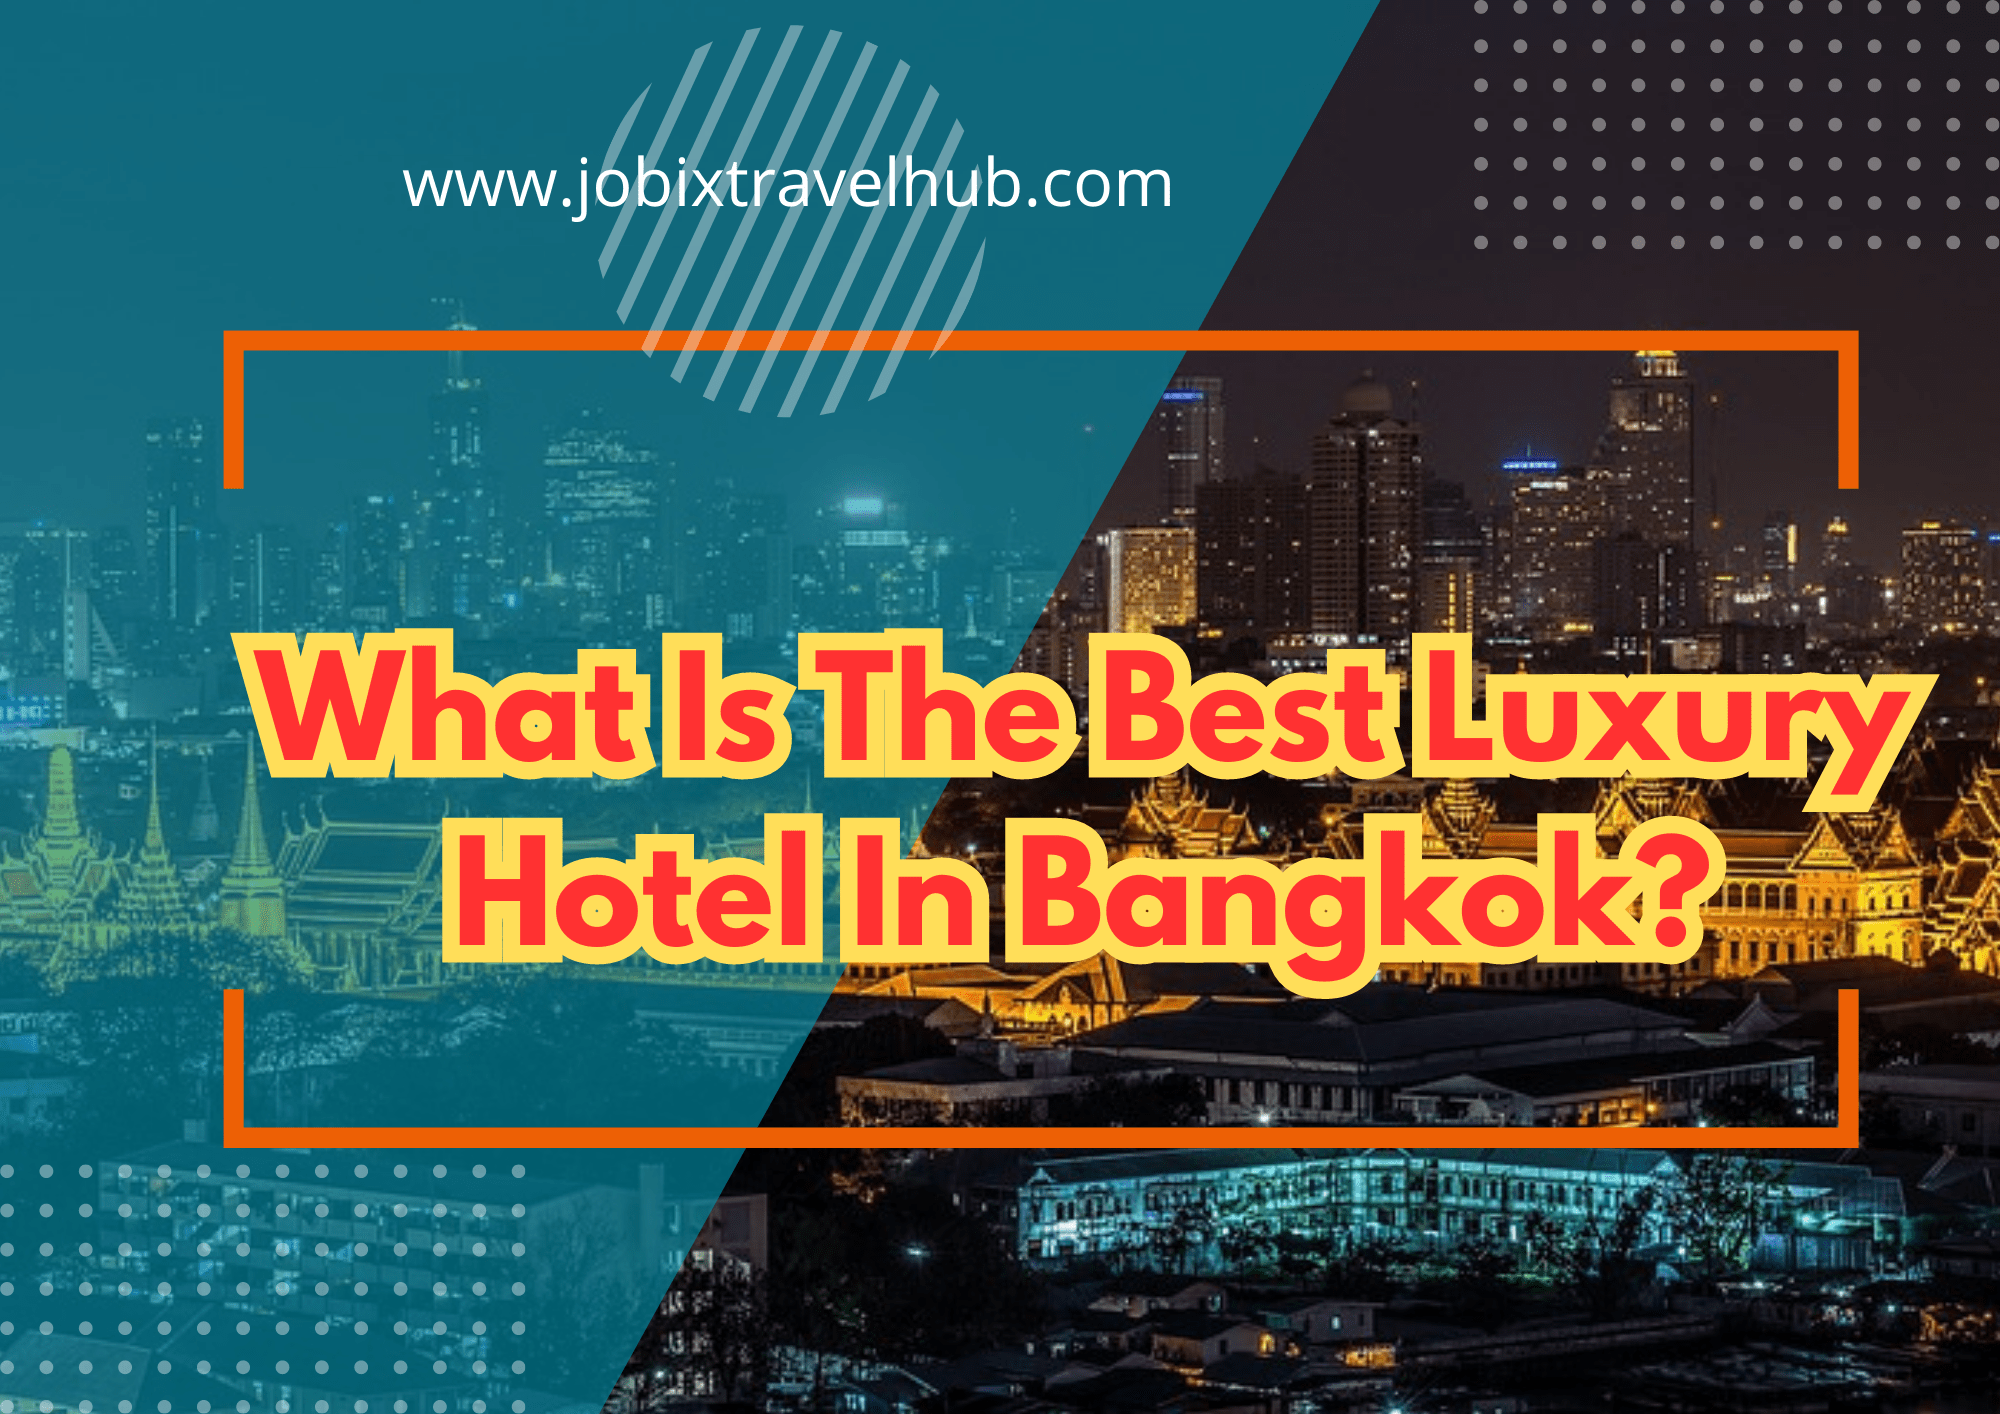 Are you dreaming of luxurious holidays, sitting by the pool with a cocktail in your hand, and taking advantage of all the amenities of being a travel VIP? Then let us introduce you to the best luxury hotel in Bangkok.